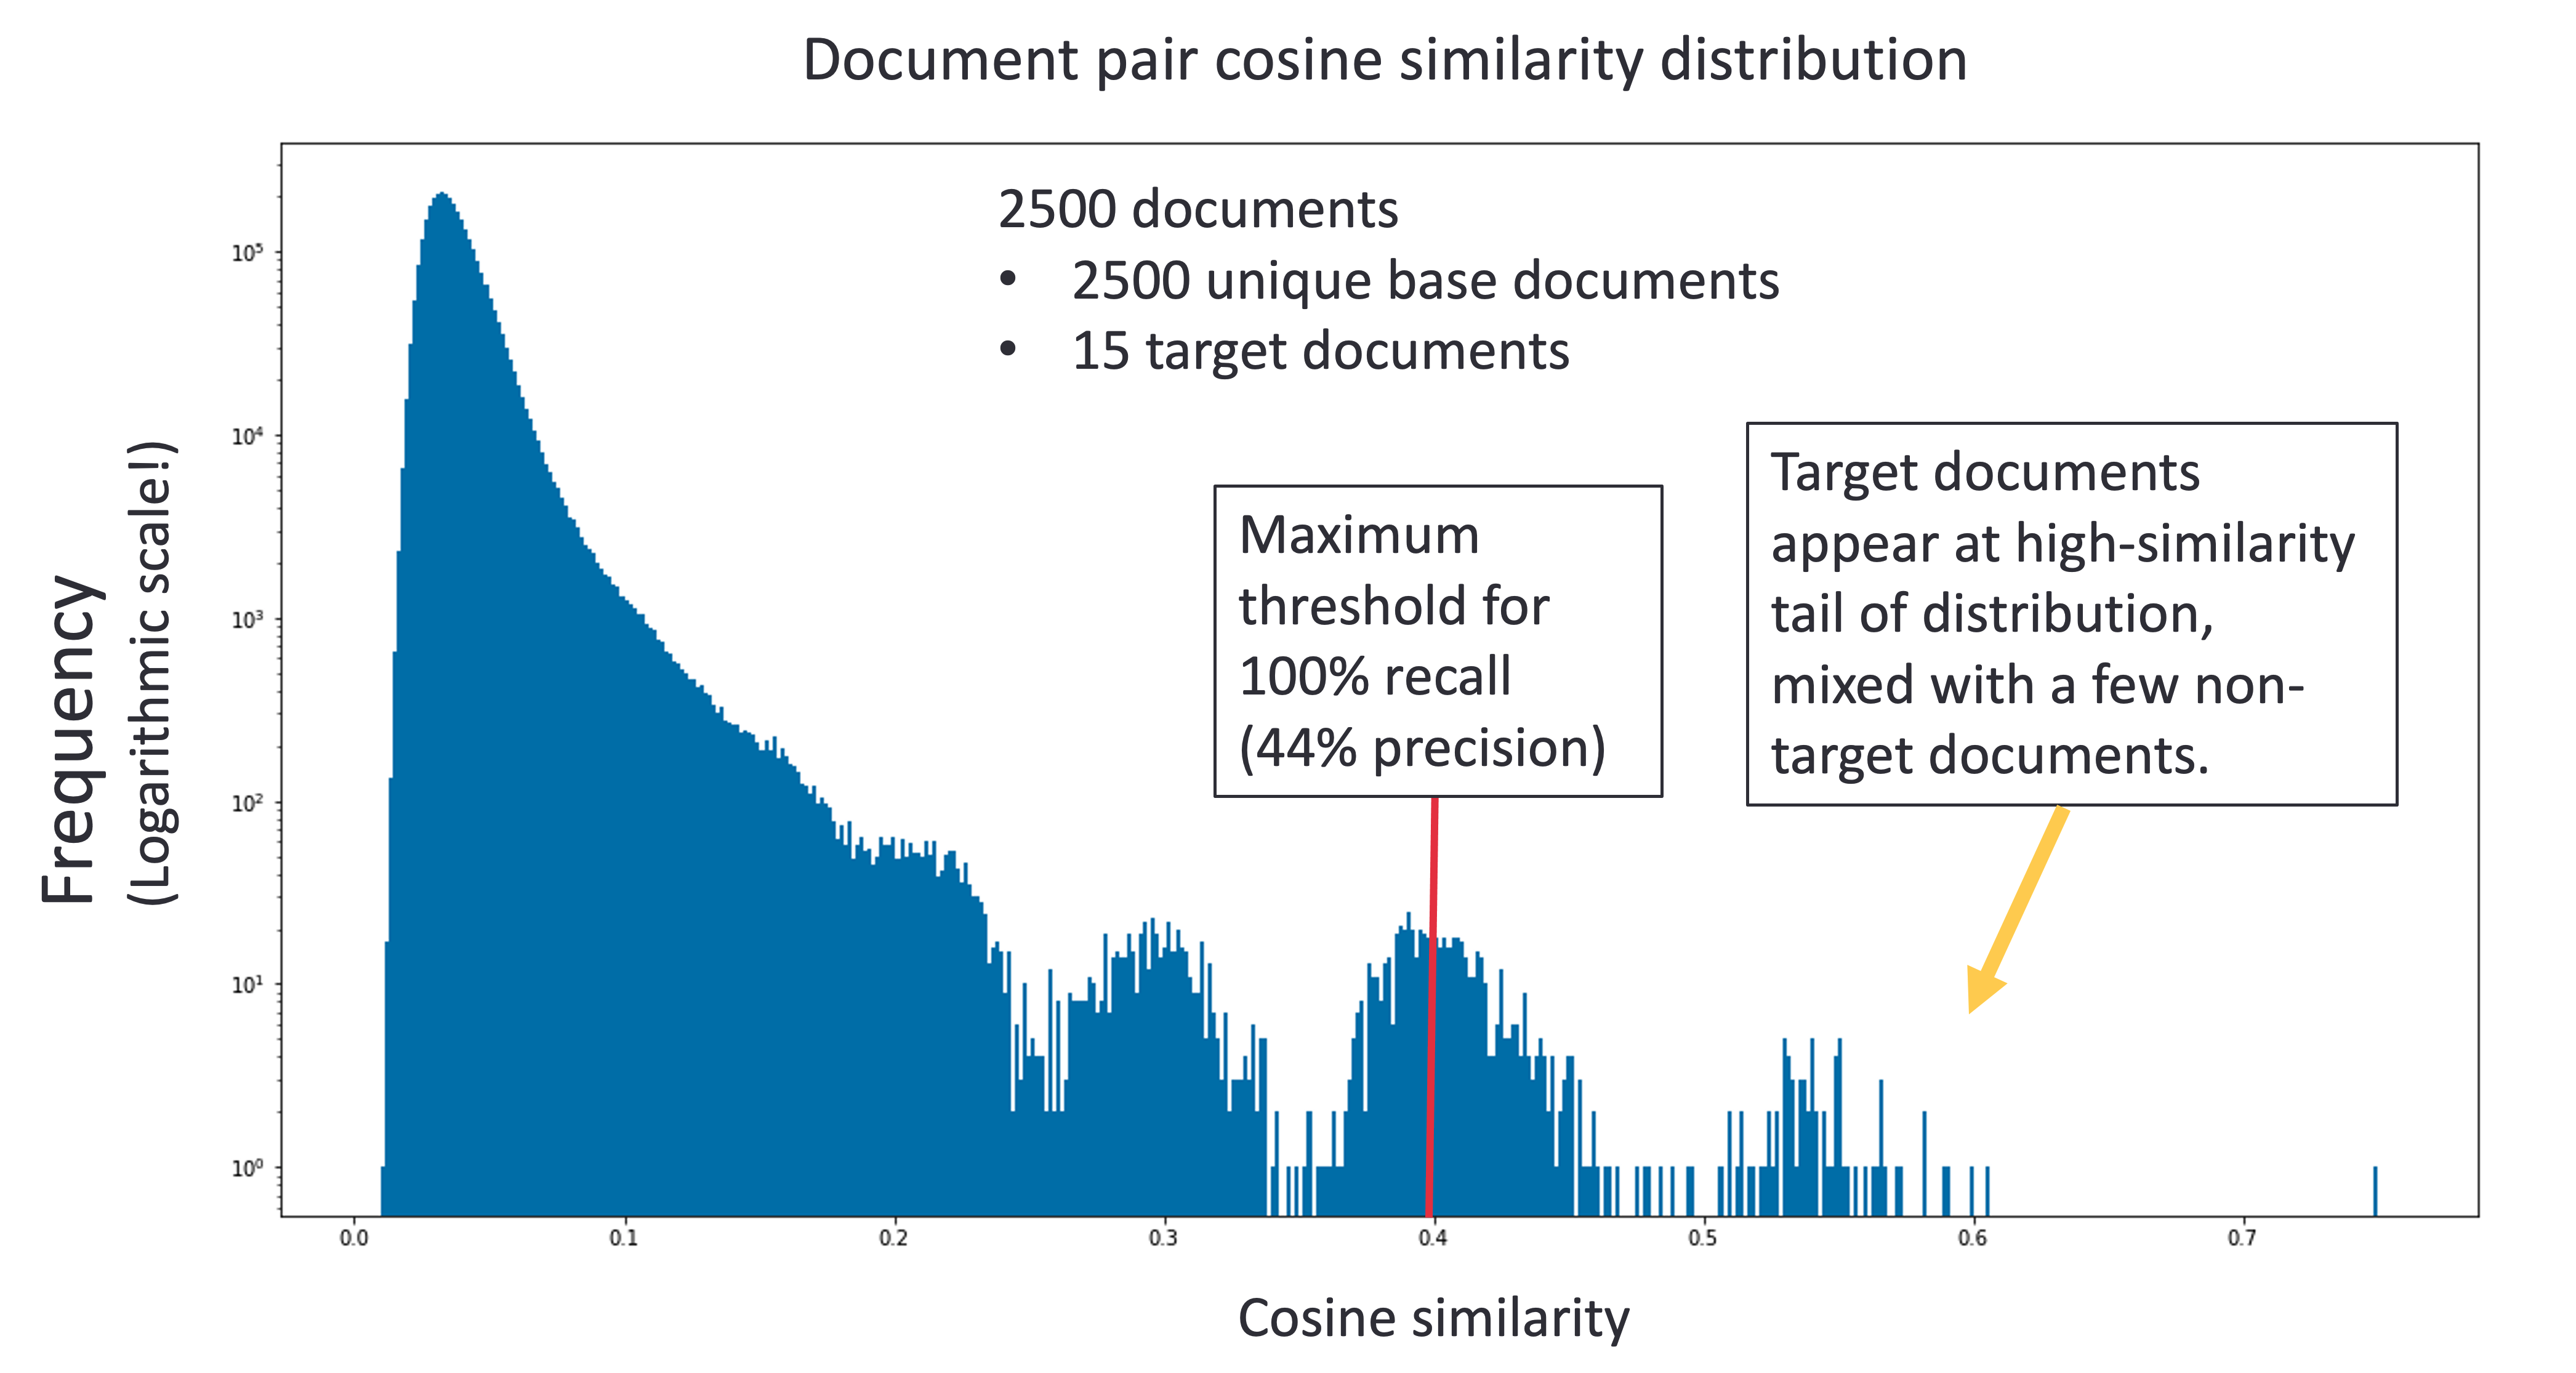 Graph of cosine similarity by frequency, showing how forged and duplicative documents have higher cosine similarity